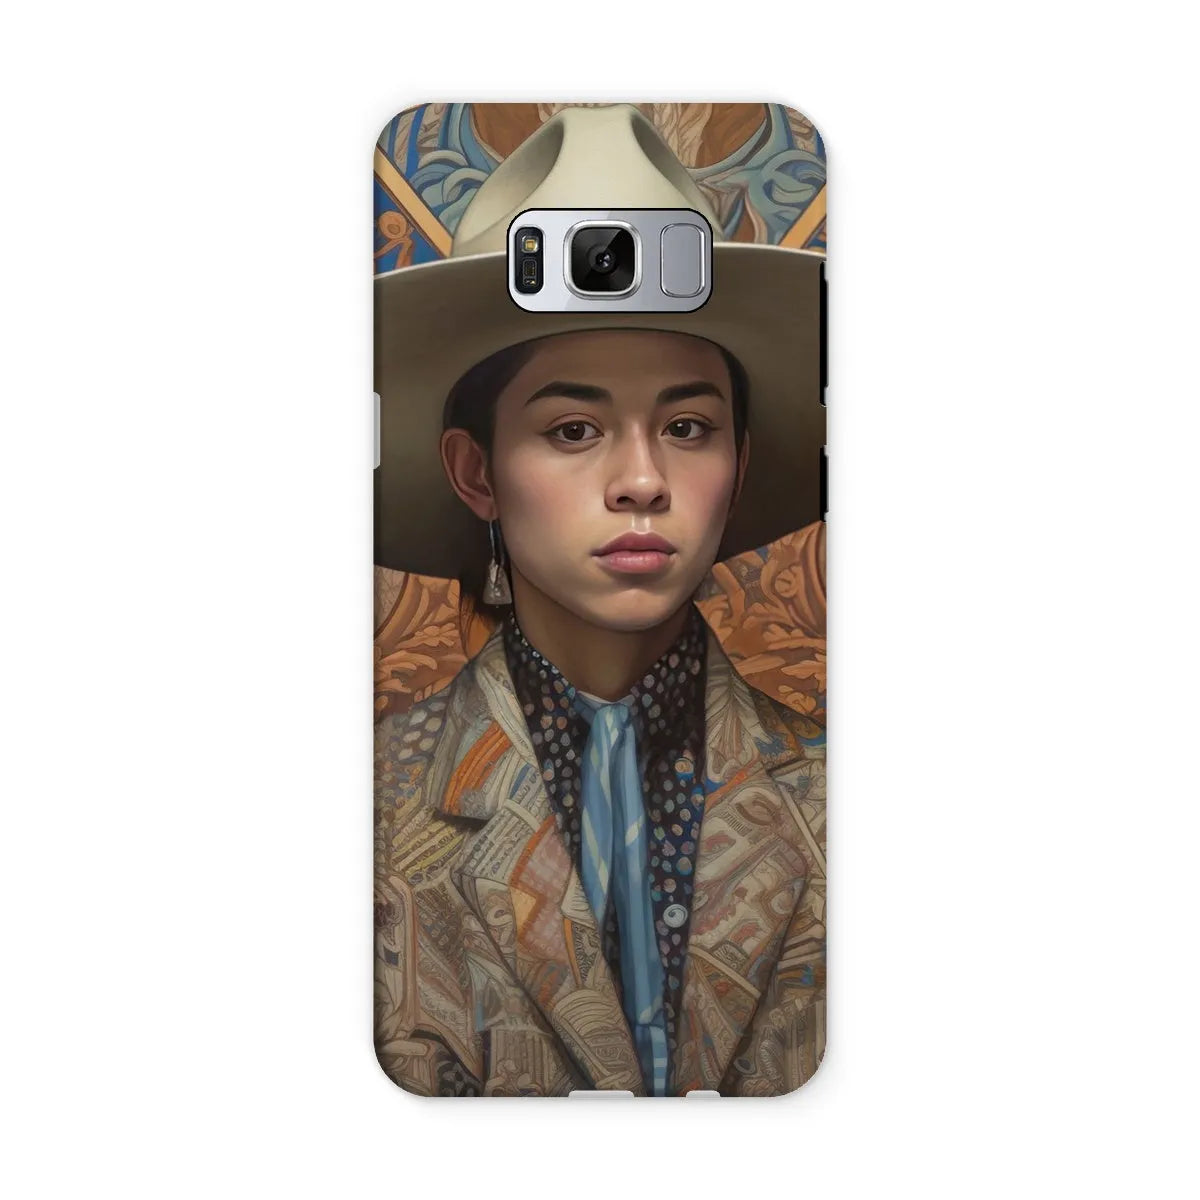 Angel The Transgender Cowboy - F2m Outlaw Art Phone Case - Samsung Galaxy S8 / Matte - Mobile Phone Cases - Aesthetic